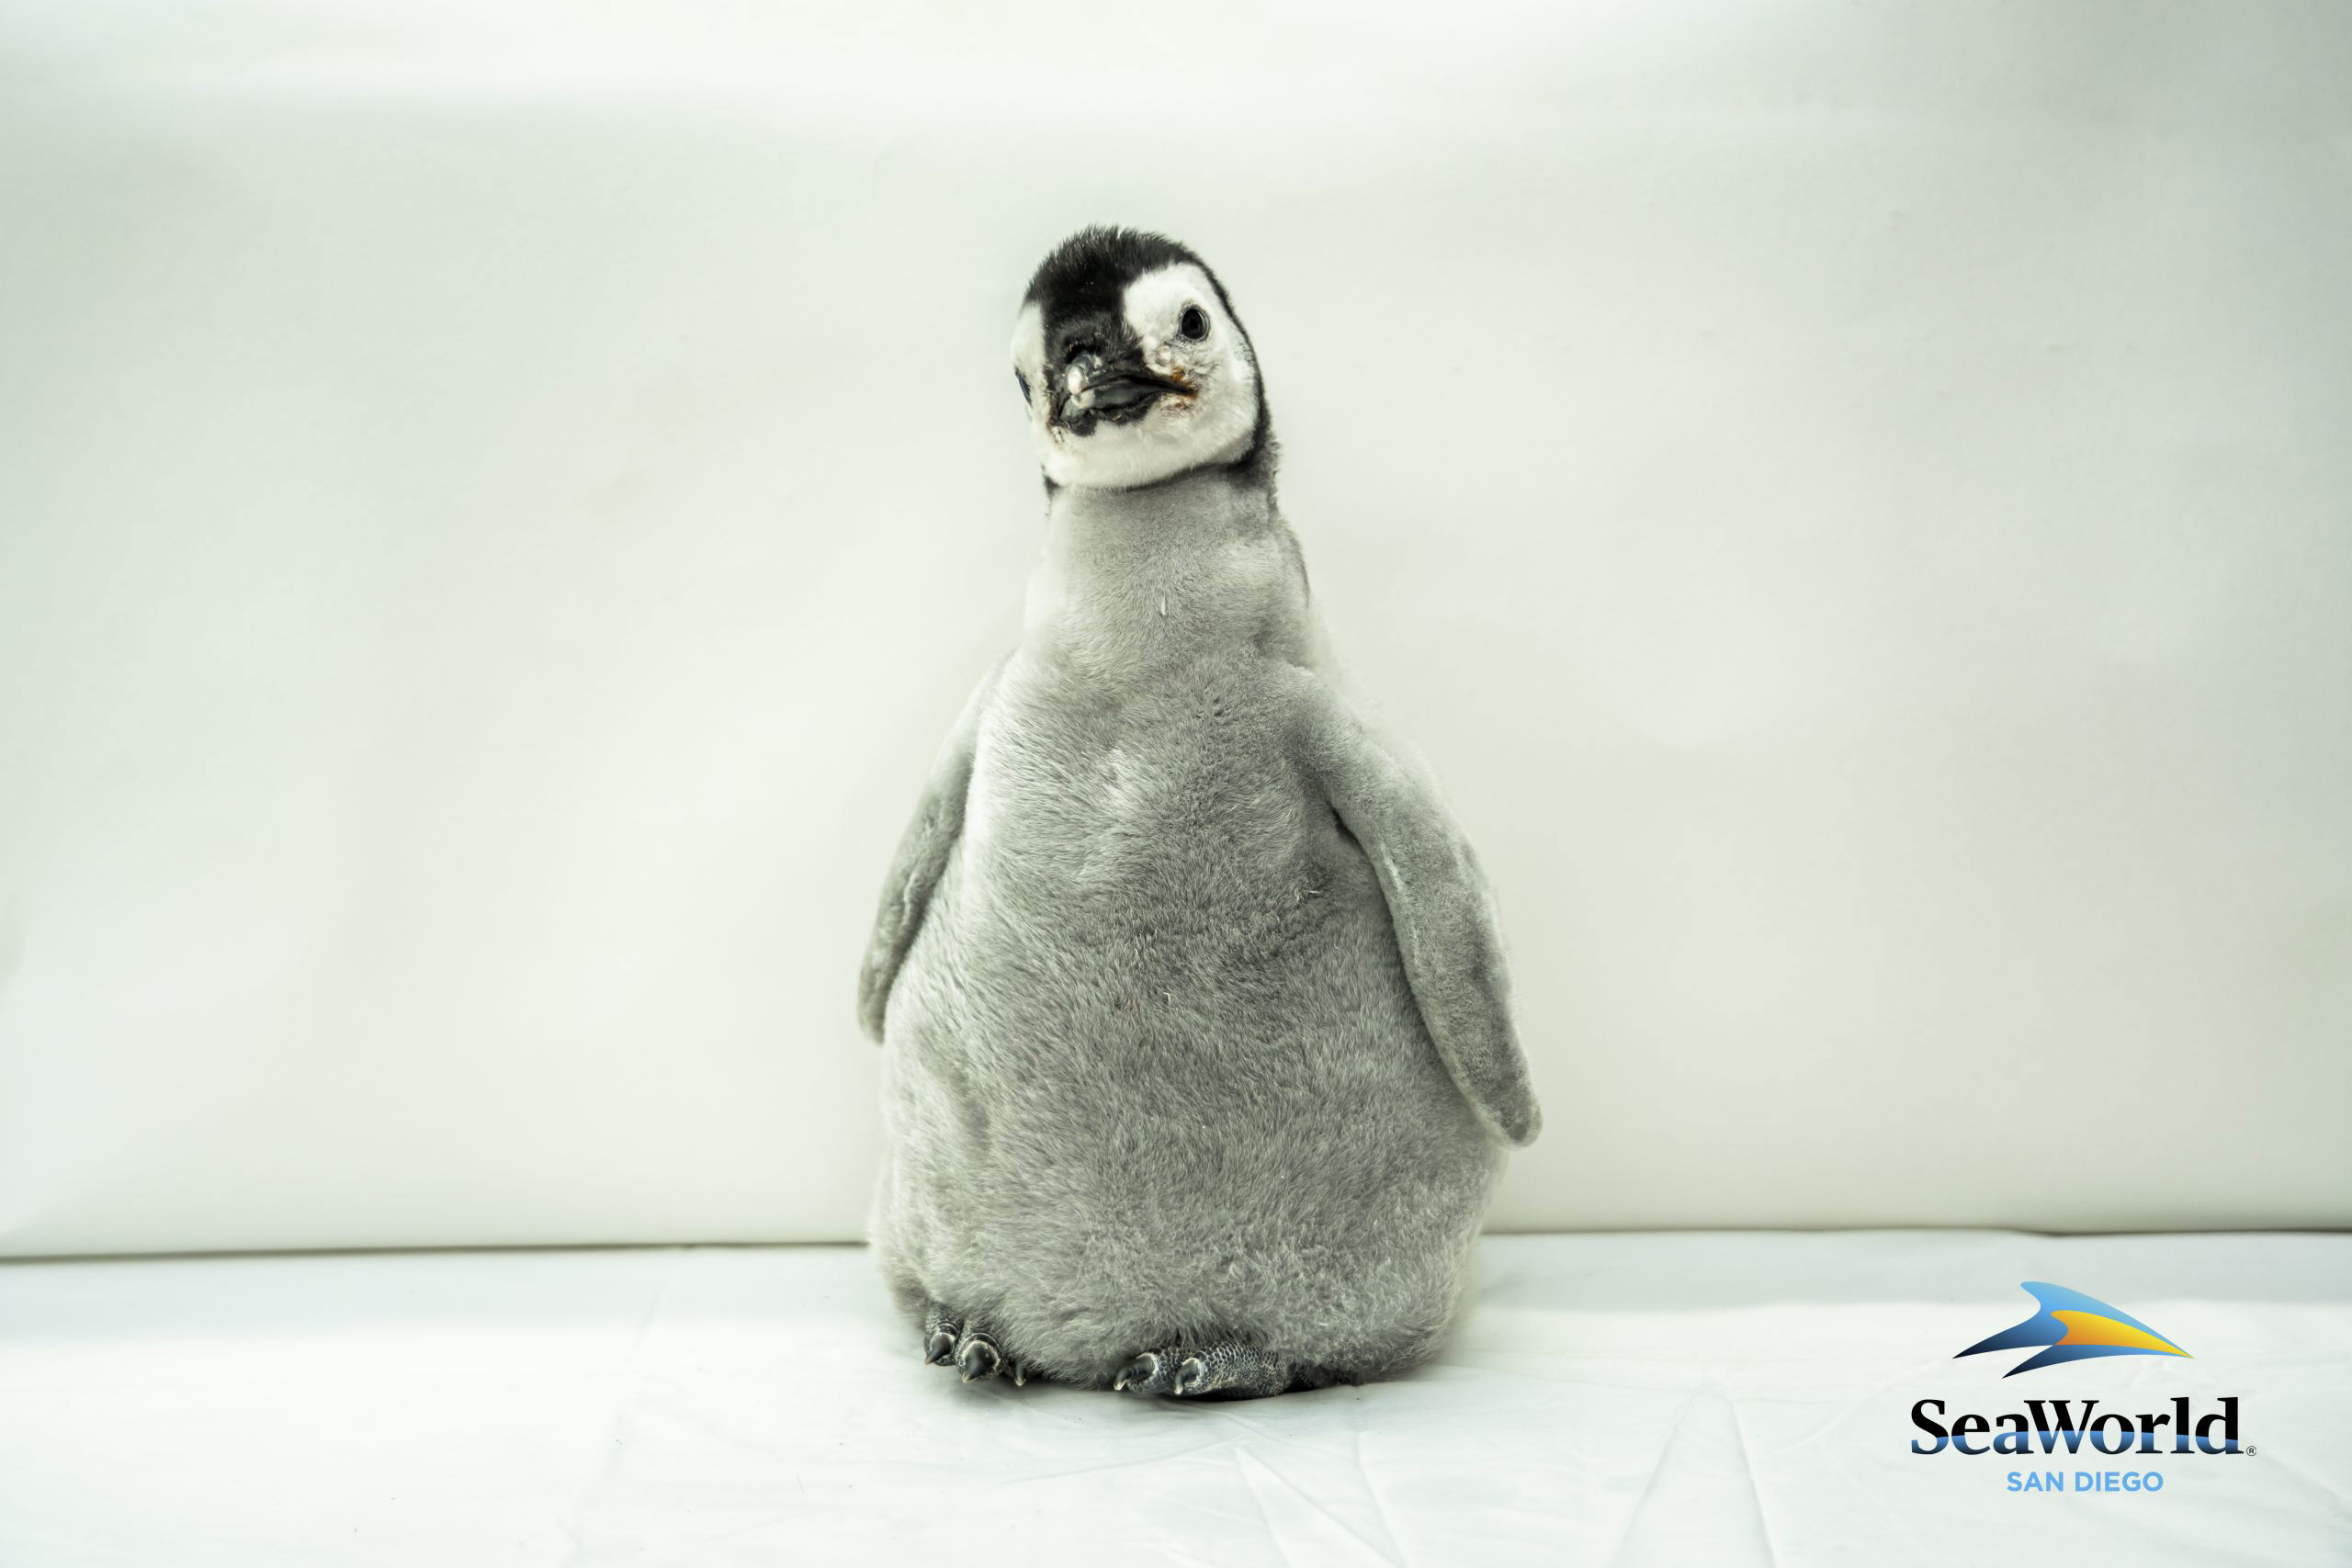 SeaWorld San Diego Announces Name of New Emperor Penguin Chick -- Pearl